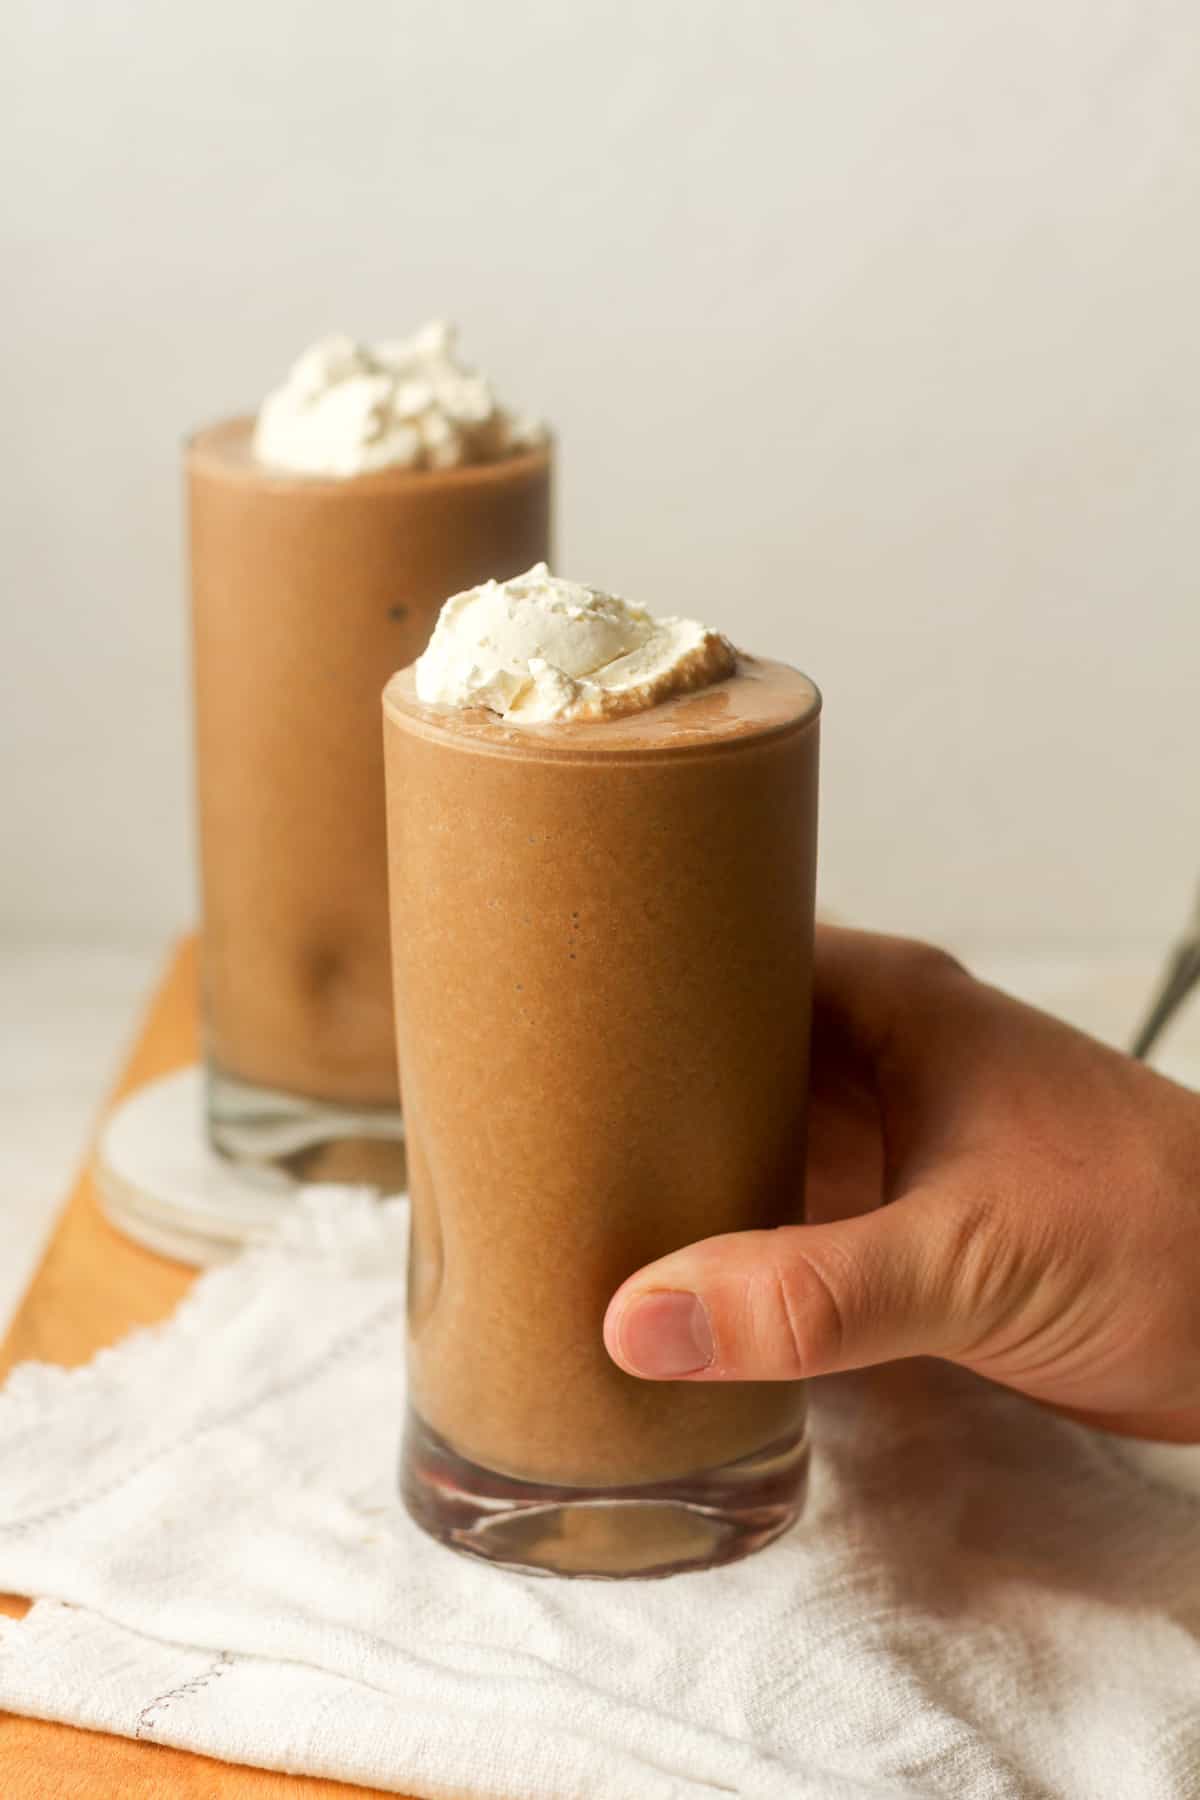 A hand on a tall glass of coffee smoothie with whipped topping.